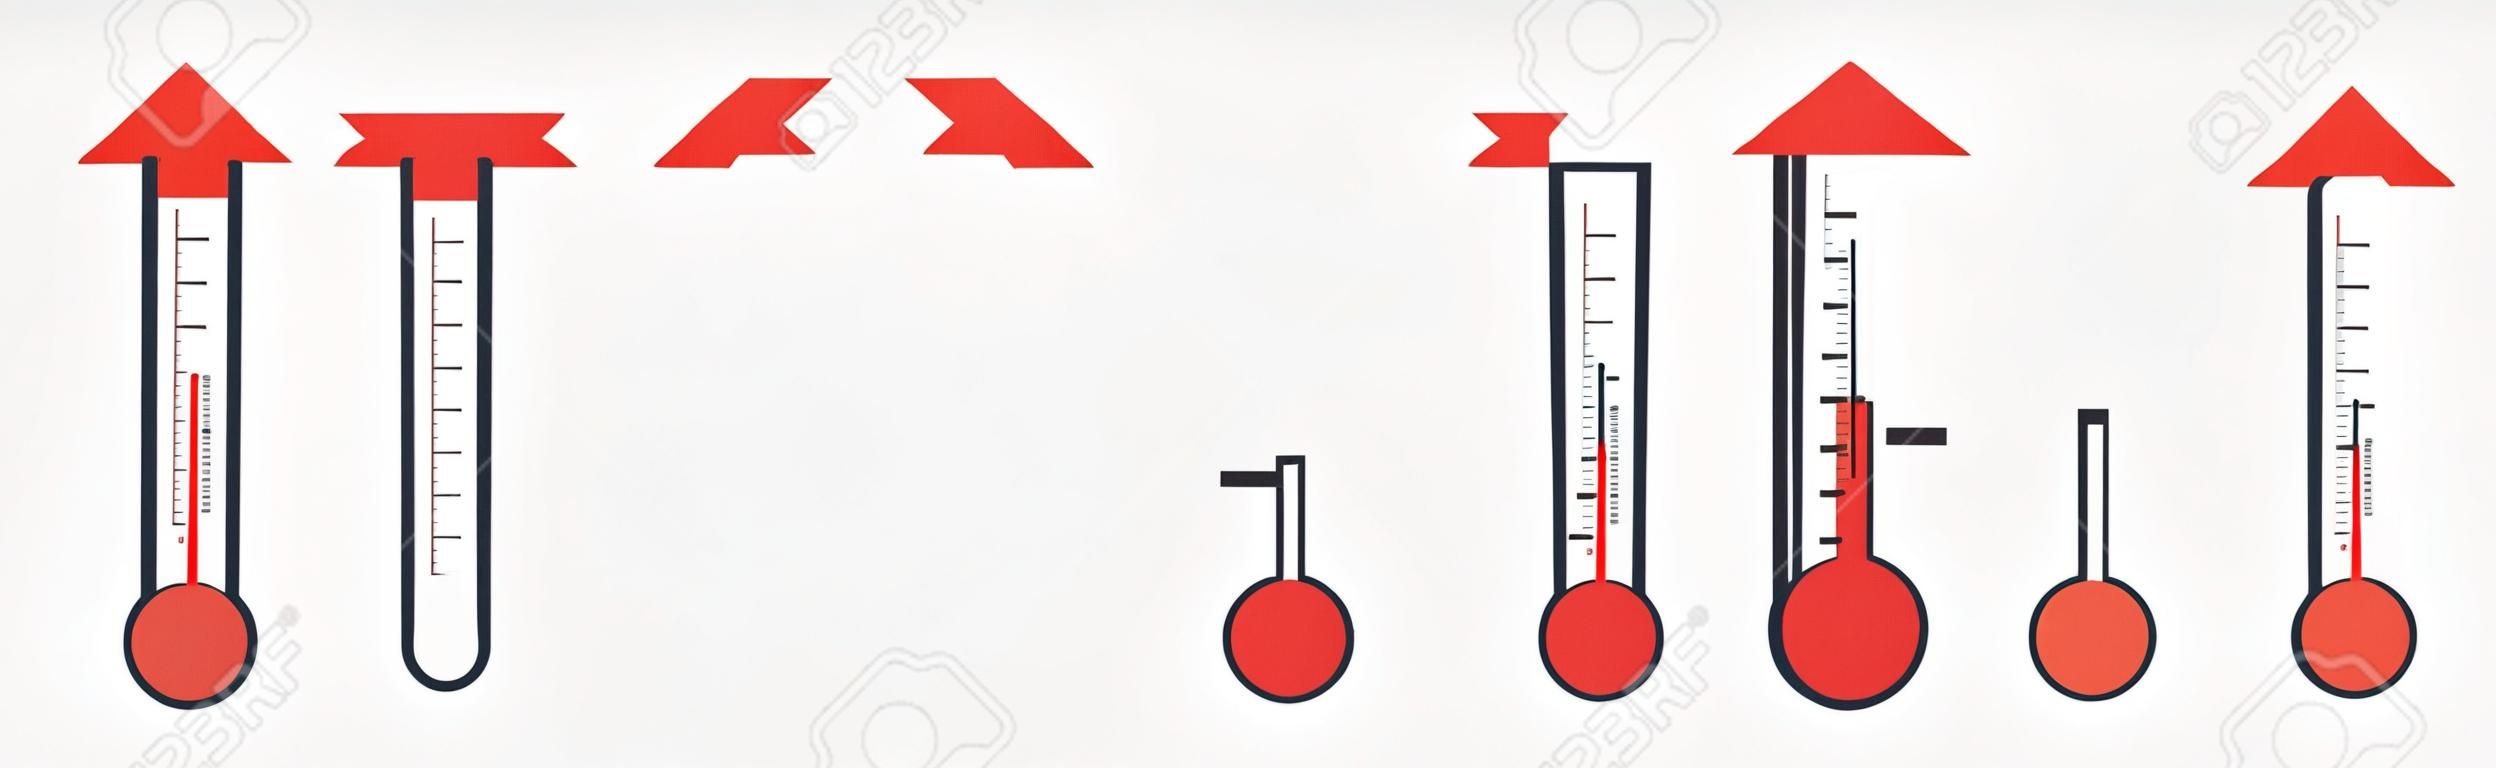 illustration of red thermometers with different levels, flat style, EPS10.